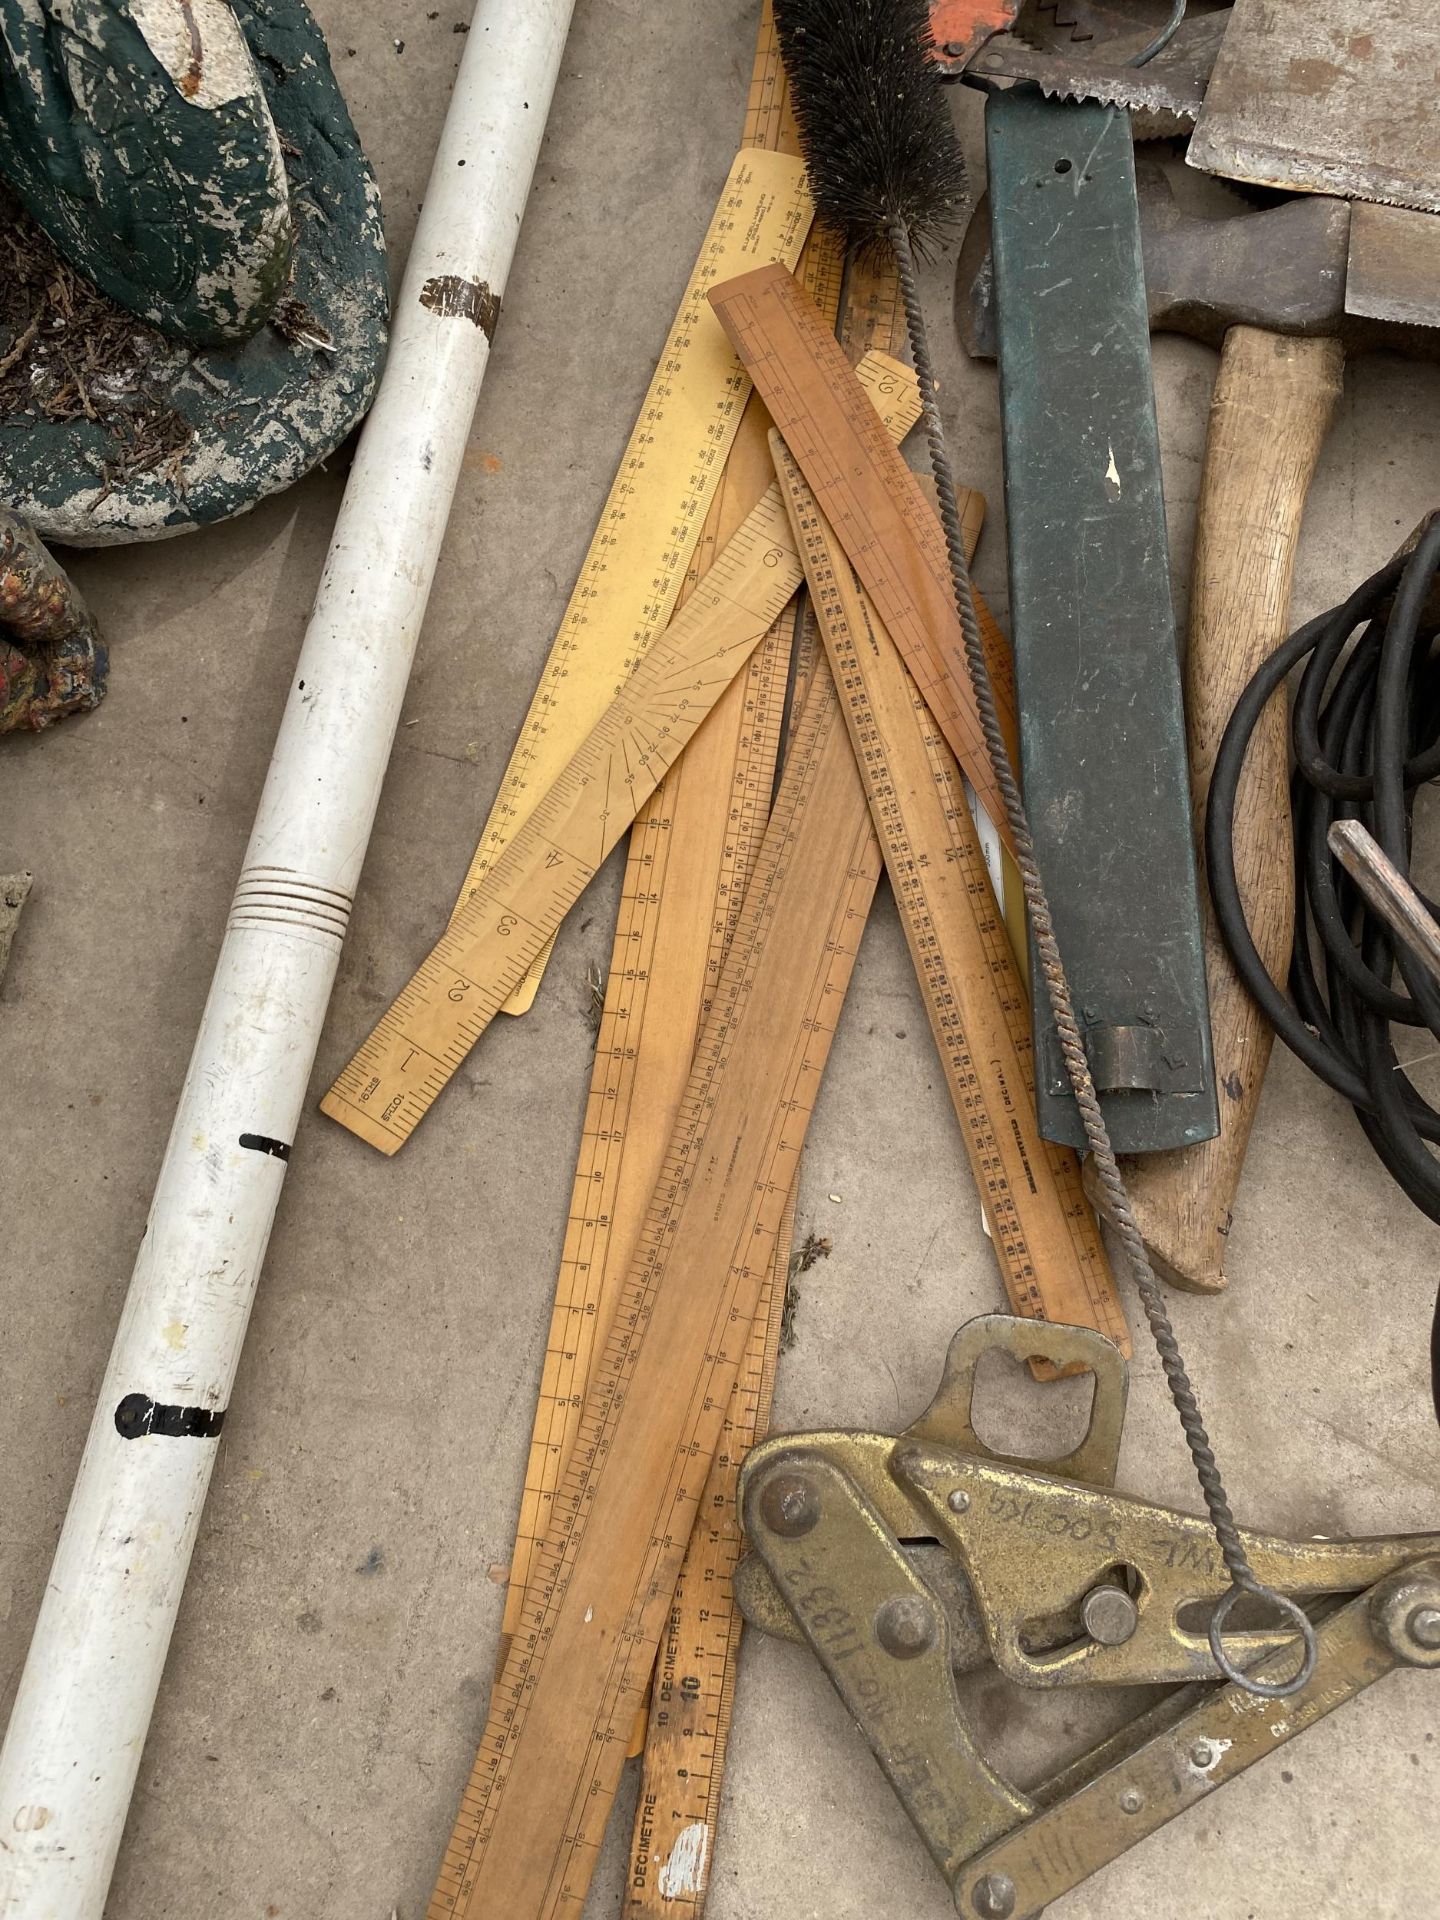 AN ASSORTMENT OF VINTAGE TOOLS TO INCLUDE SAWS, AN AXE AND A 12MM X 1000MM SDS DRILL BIT ETC - Image 3 of 3